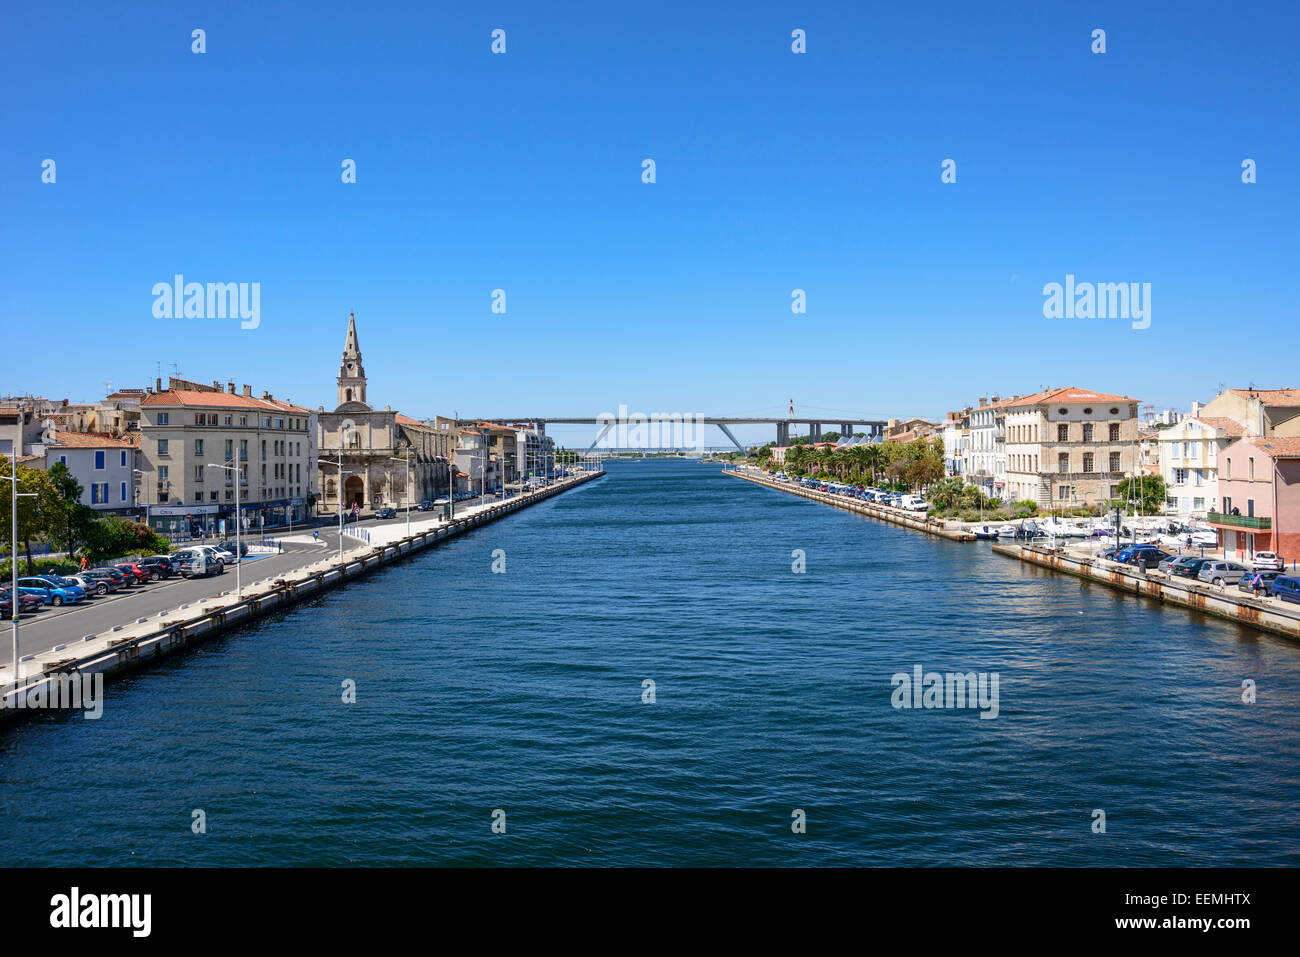 View of Martigues with A55 Highway in the background, Bouches du Rhone, PACA (Provence-Alpes-Cote d'Azur), France Stock Photo